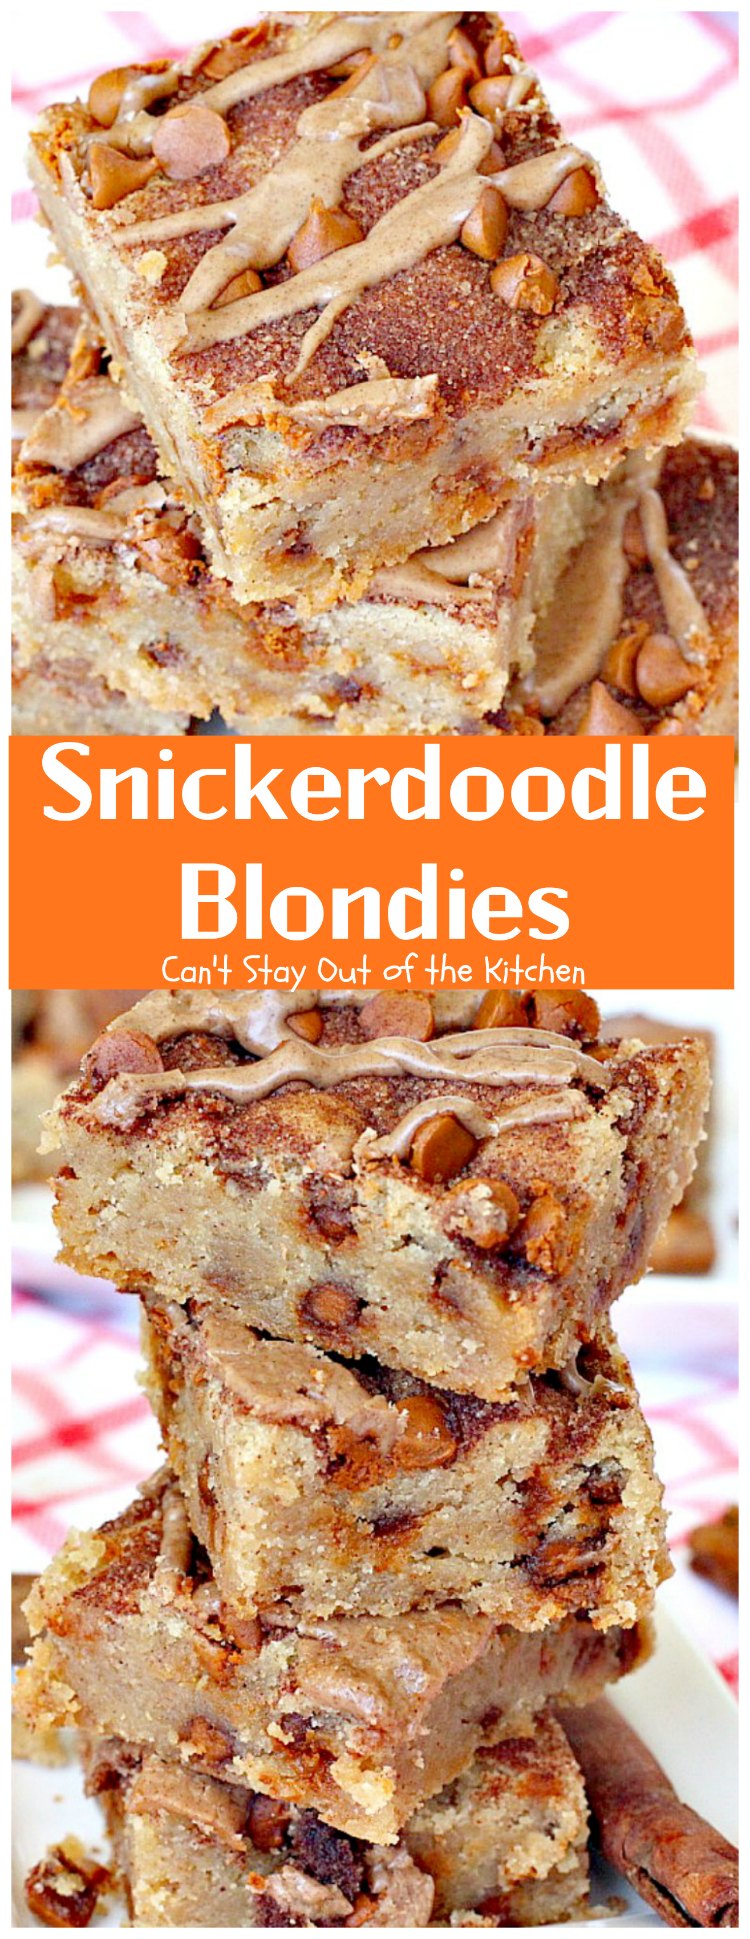 Snickerdoodle Blondies | Can't Stay Out of the Kitchen | This awesome #snickerdoodle #dessert is extra rich with the addition of #cinnamonchips & a #cinnamon glaze. We love them! #brownies